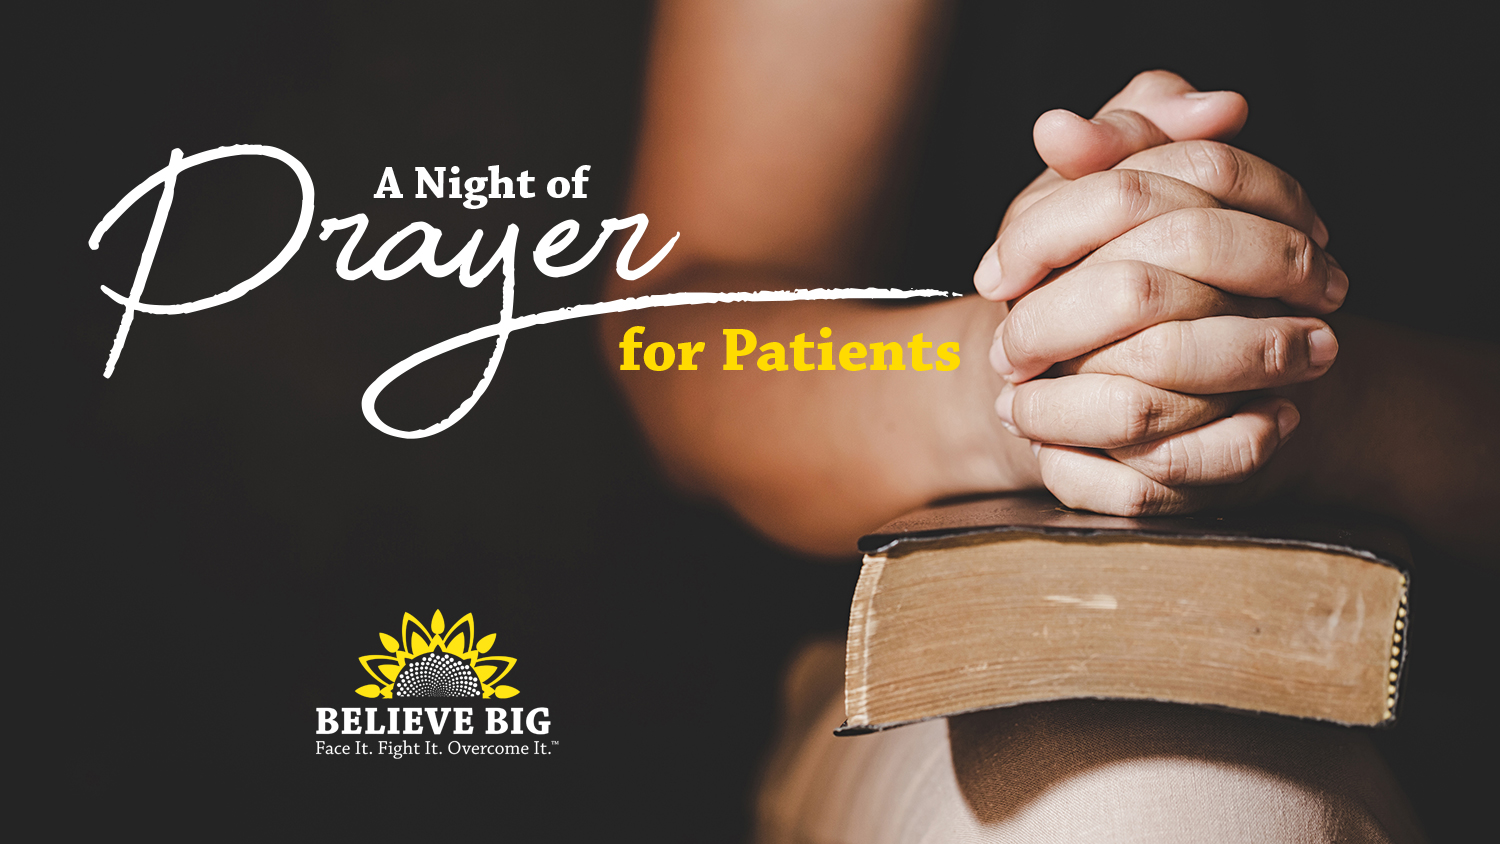 A Night of Prayer for Patients